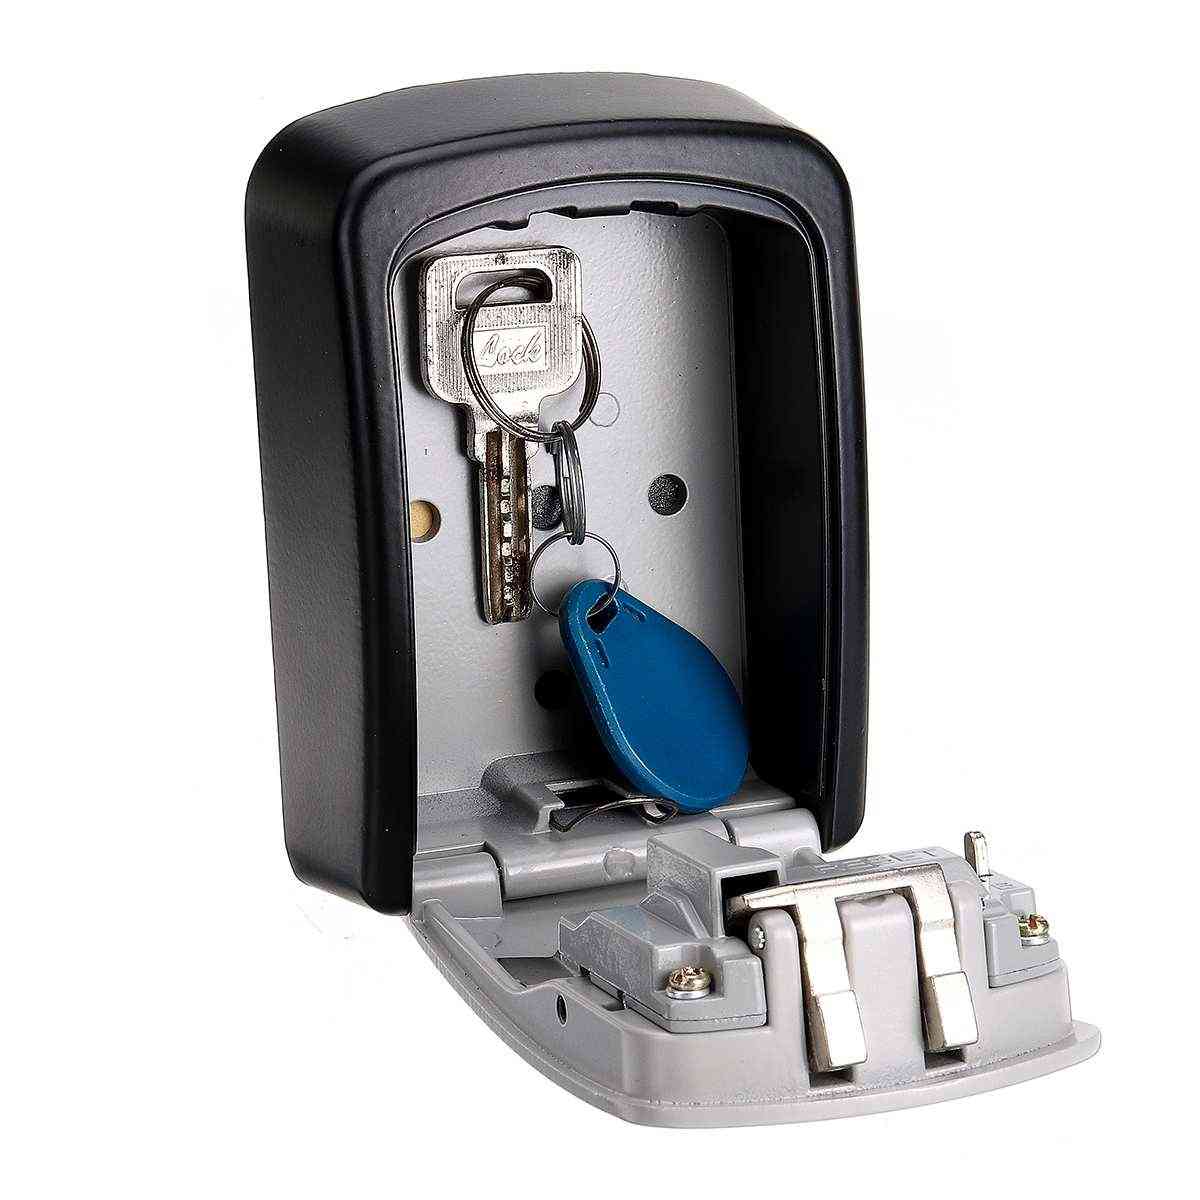 4-digit Wall-mounted Curved Key Card Password Master Key Safe Box